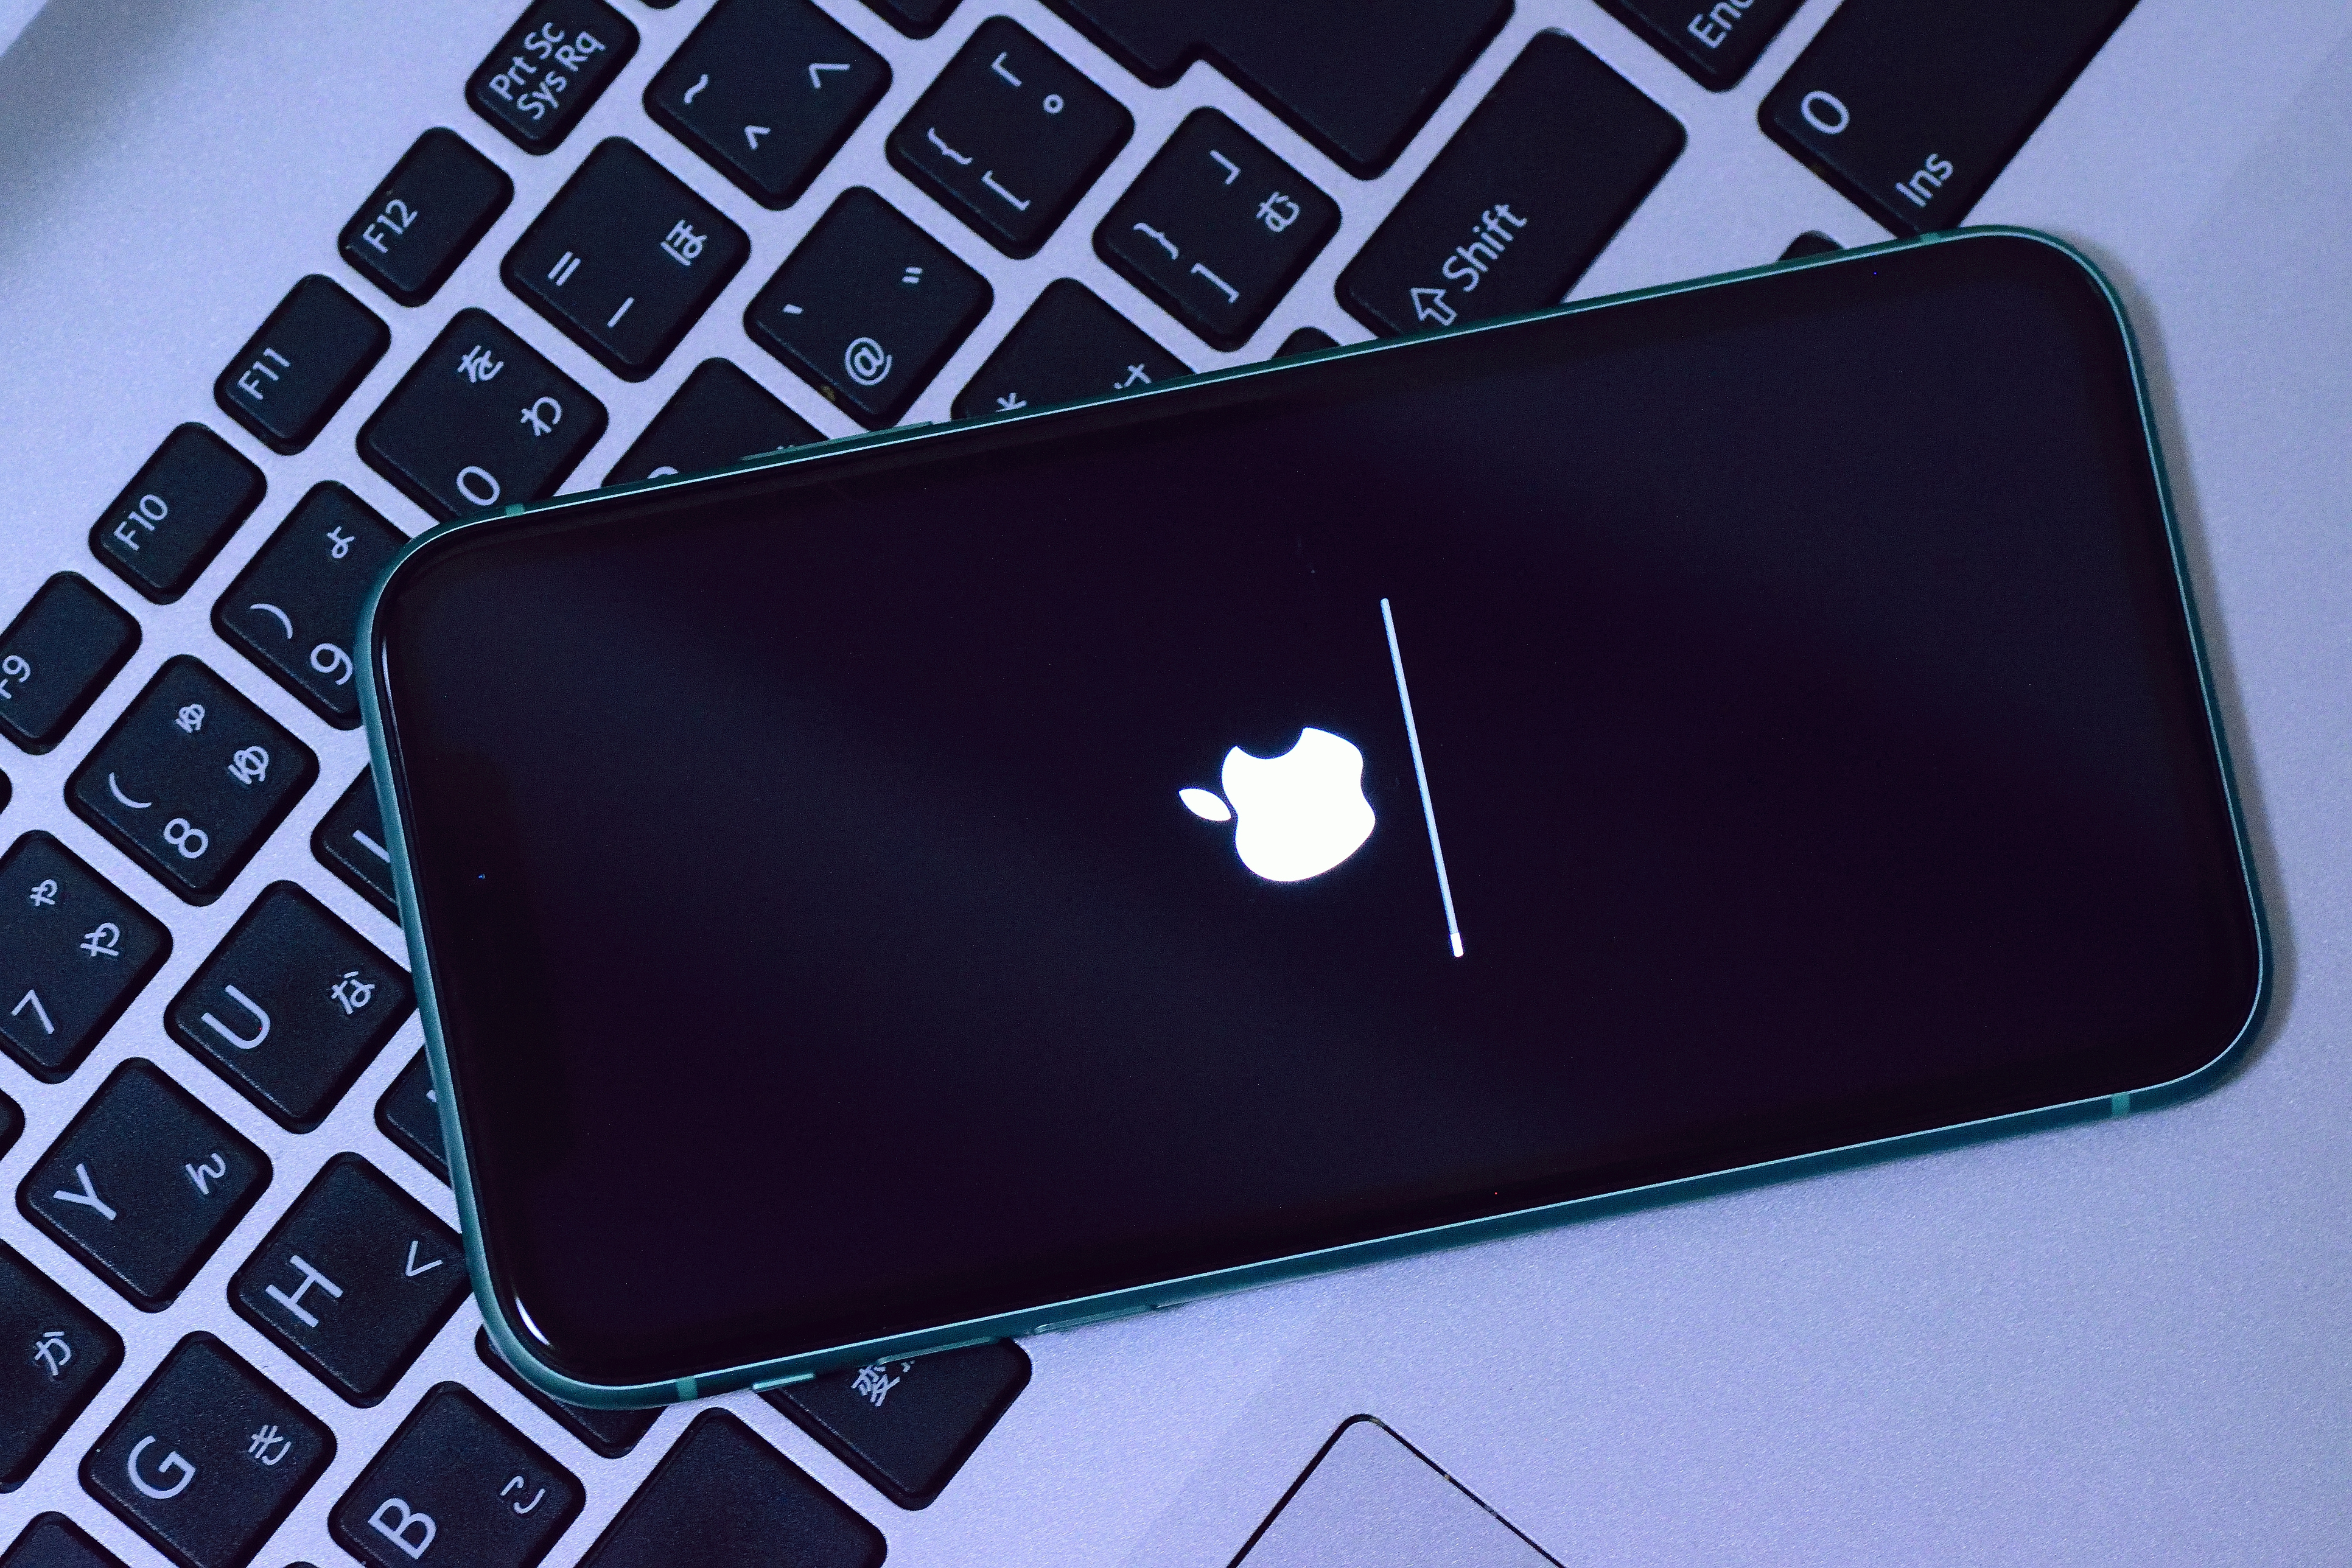 Update Your Apple Devices to iOS 14.7.1 Now